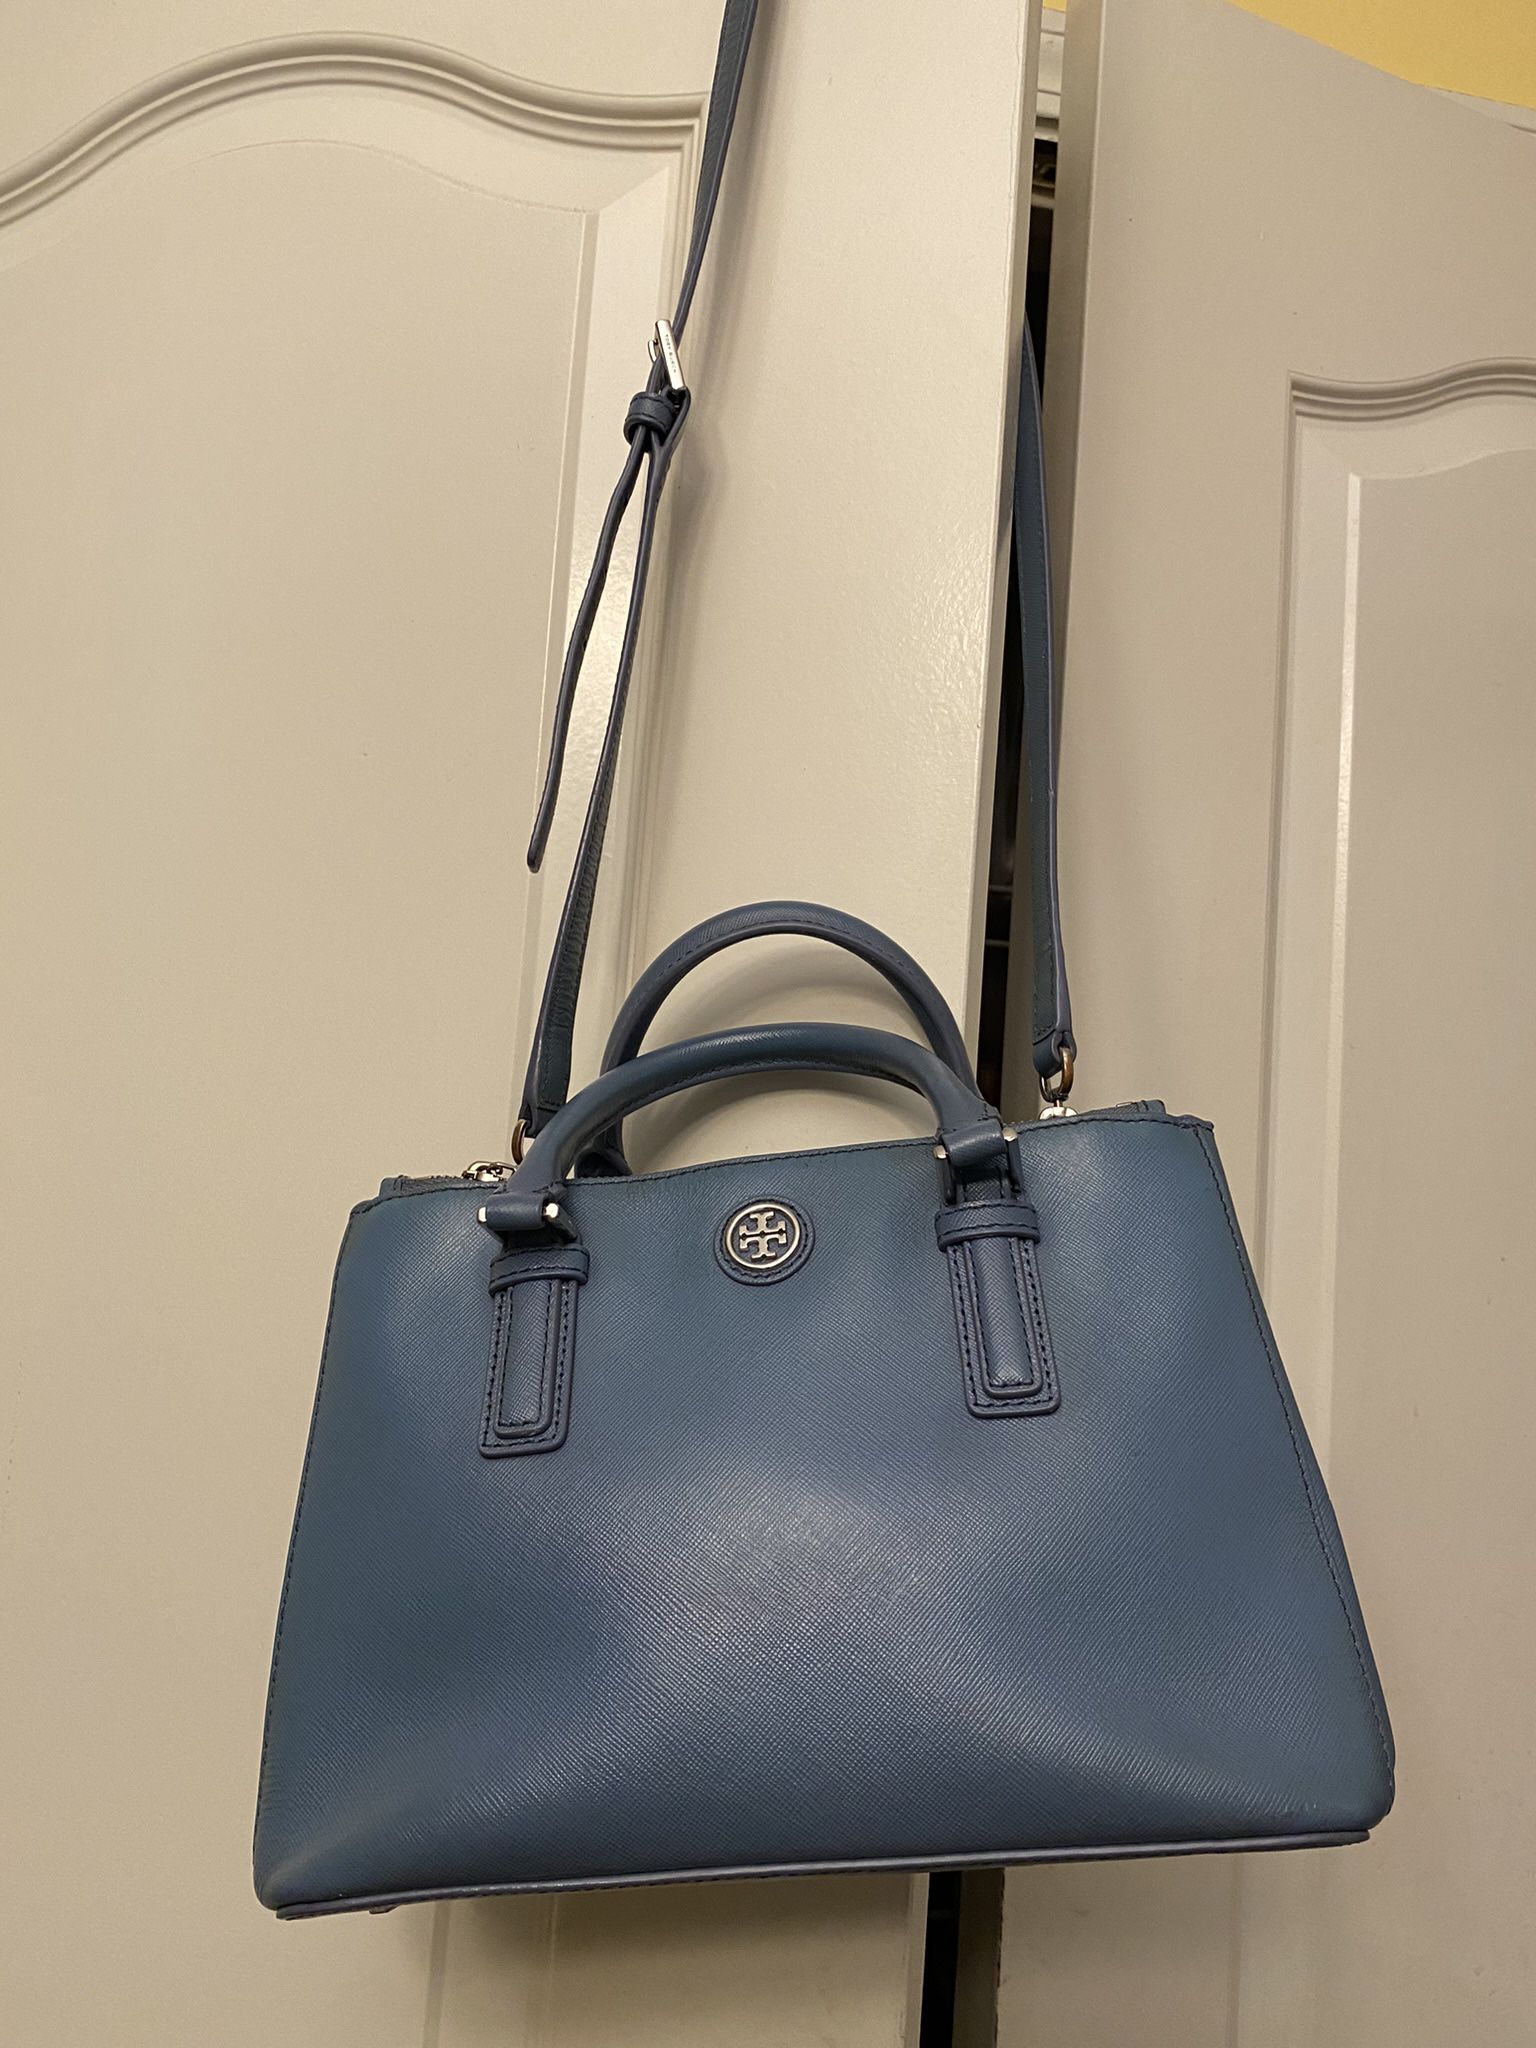 Tory Burch Kerrington Blossom Ditsy Saffiano Leather Small Tote Bag for  Sale in Elk Grove, CA - OfferUp